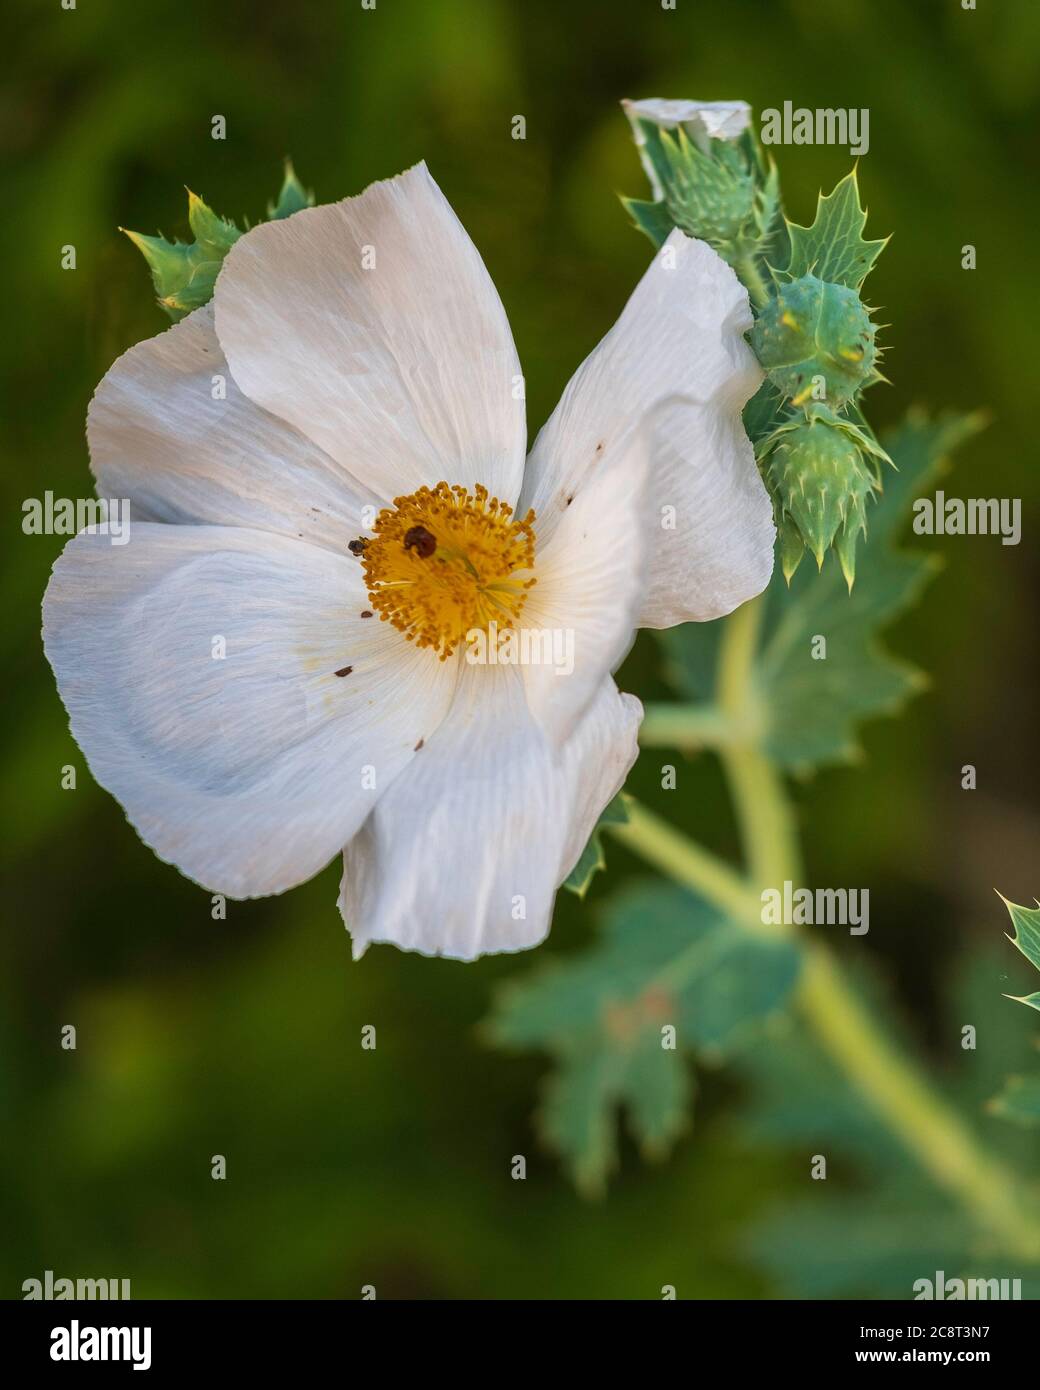 Prickly poppy, Argemone albiflora, also known by several names including Texas Prickly Poppy, growing in The Great Salt Plains state park, Oklahoma, U Stock Photo